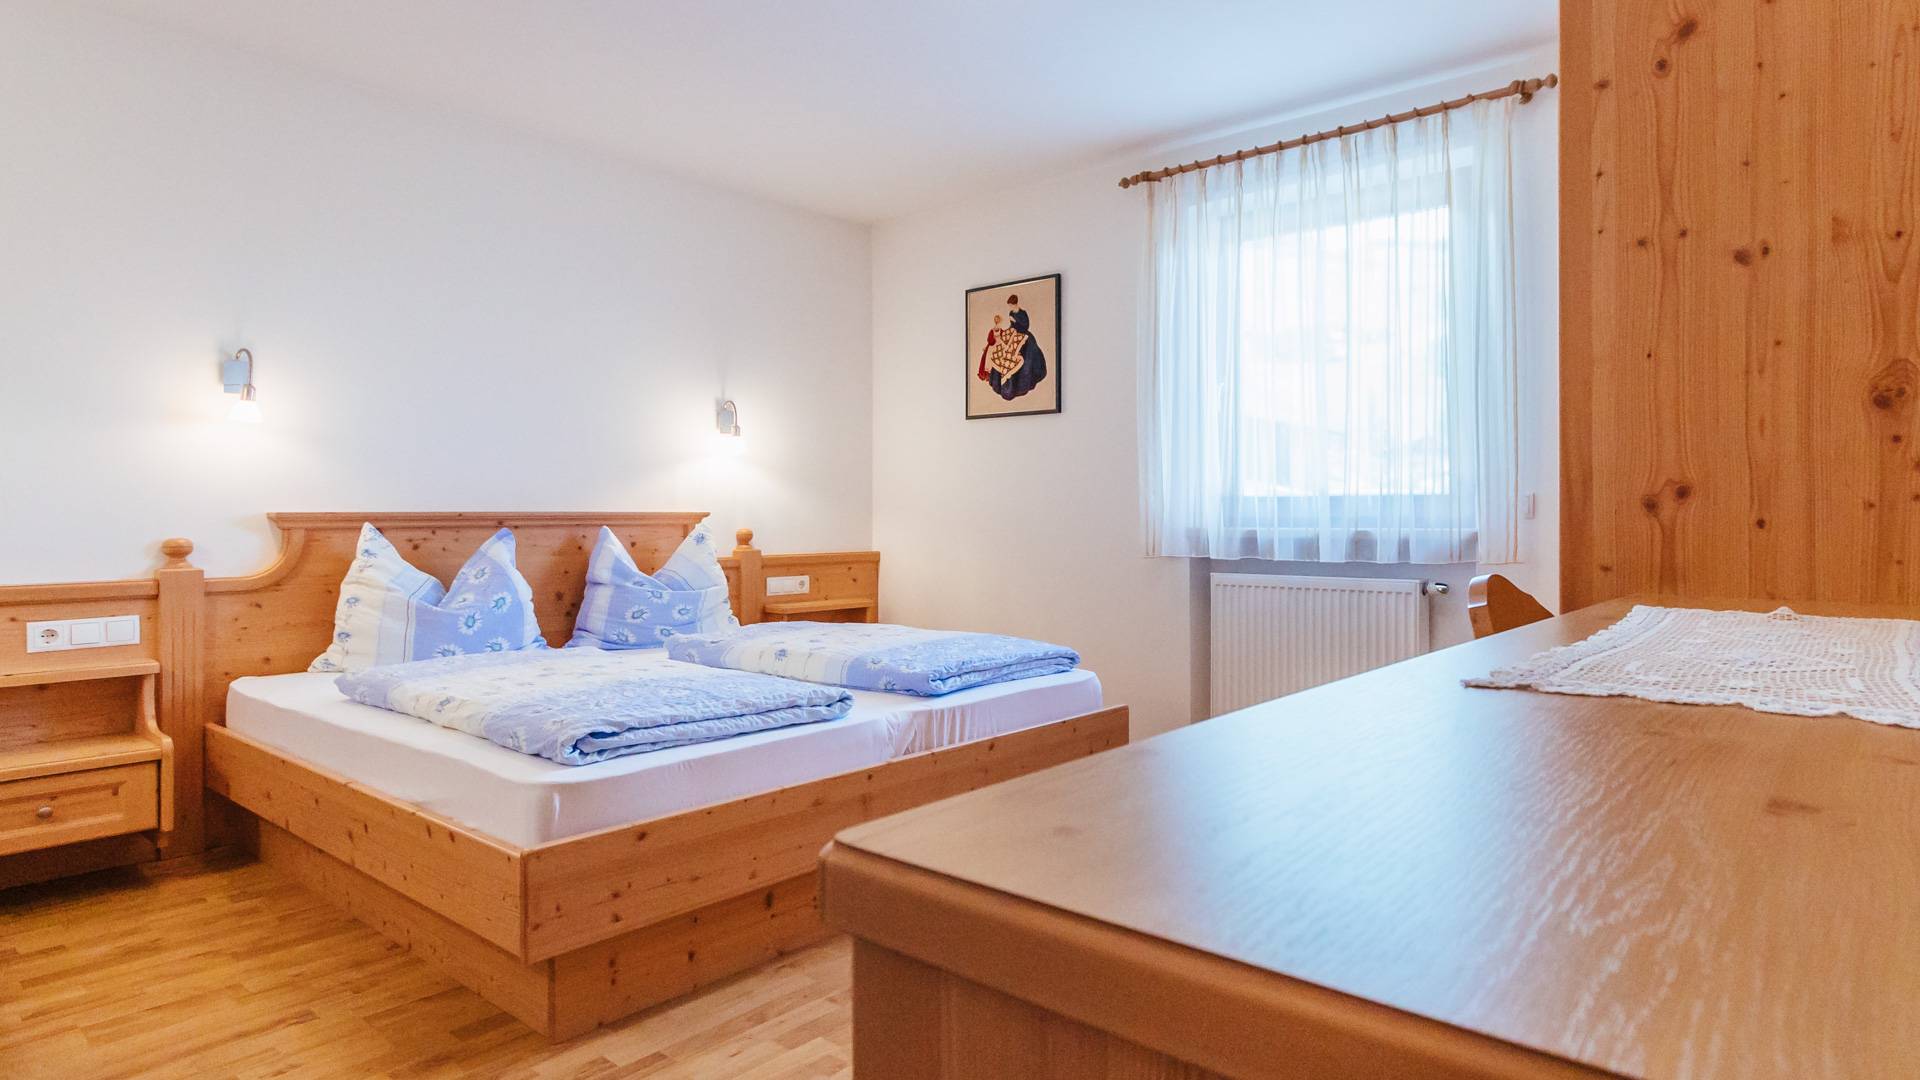 Double room of our holiday apartments Maranza
